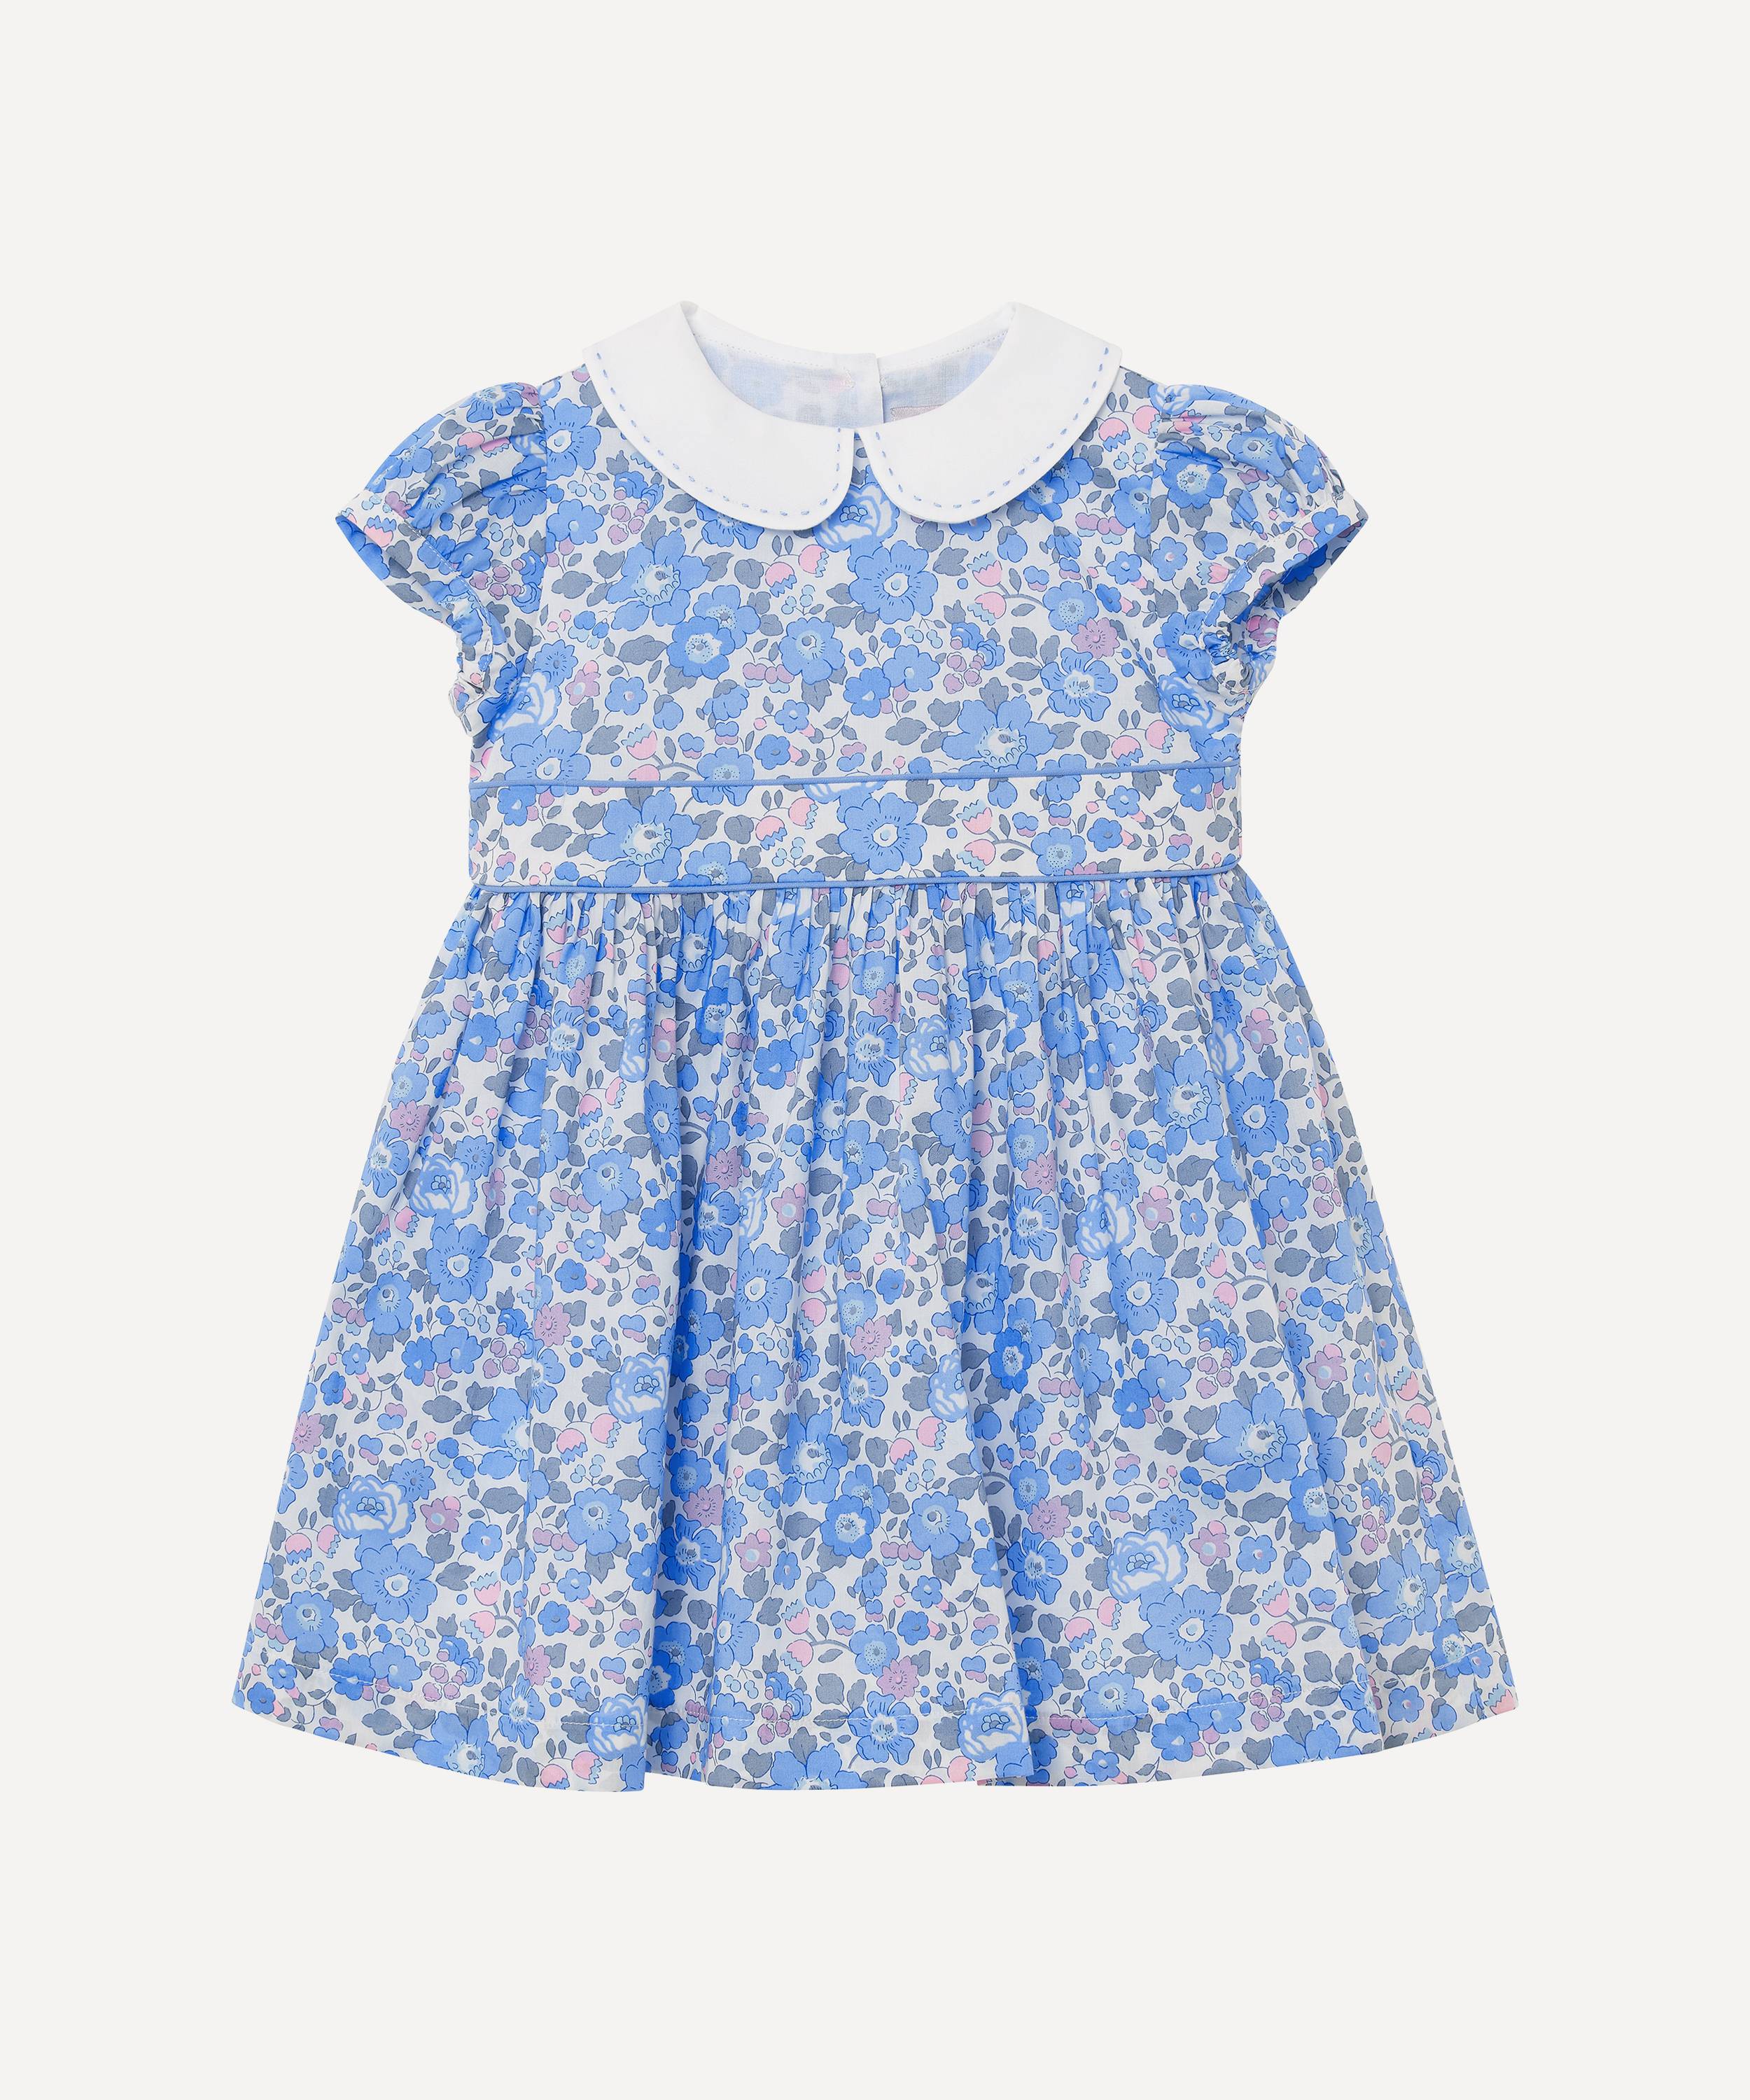 Trotters Betsy Dress 3-24 Months | Liberty